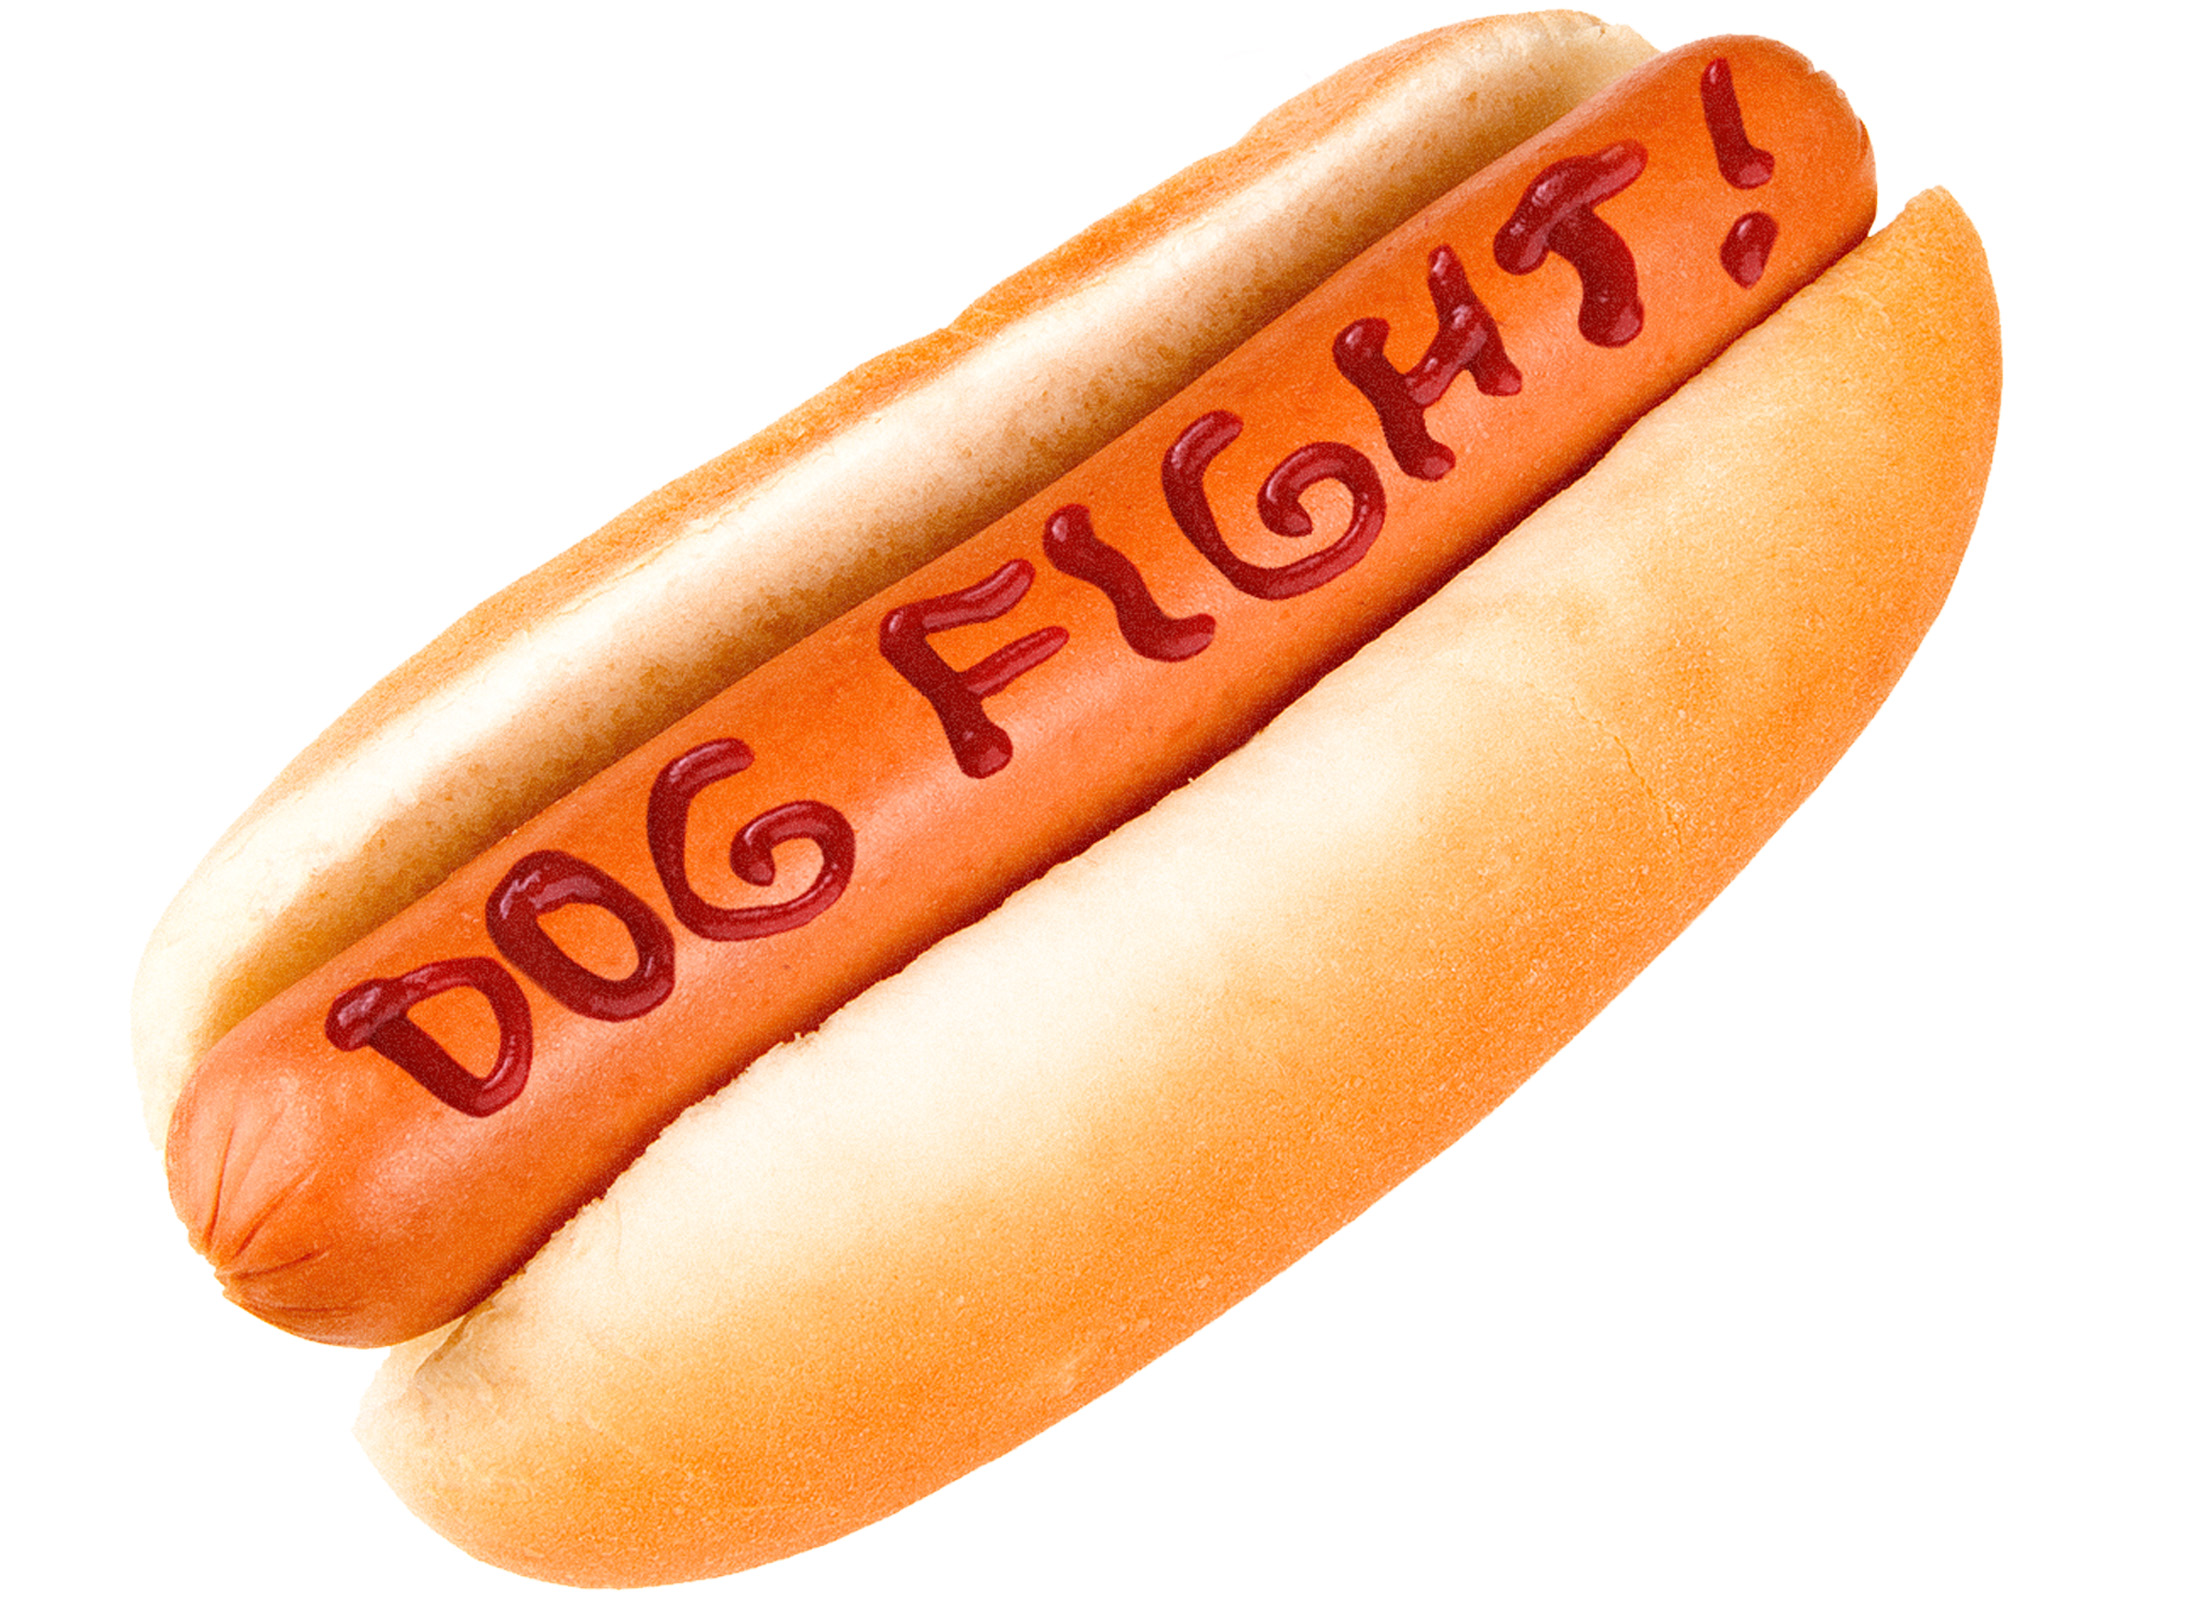 Why You Should Think Twice About Getting Concession Stand Hot Dogs